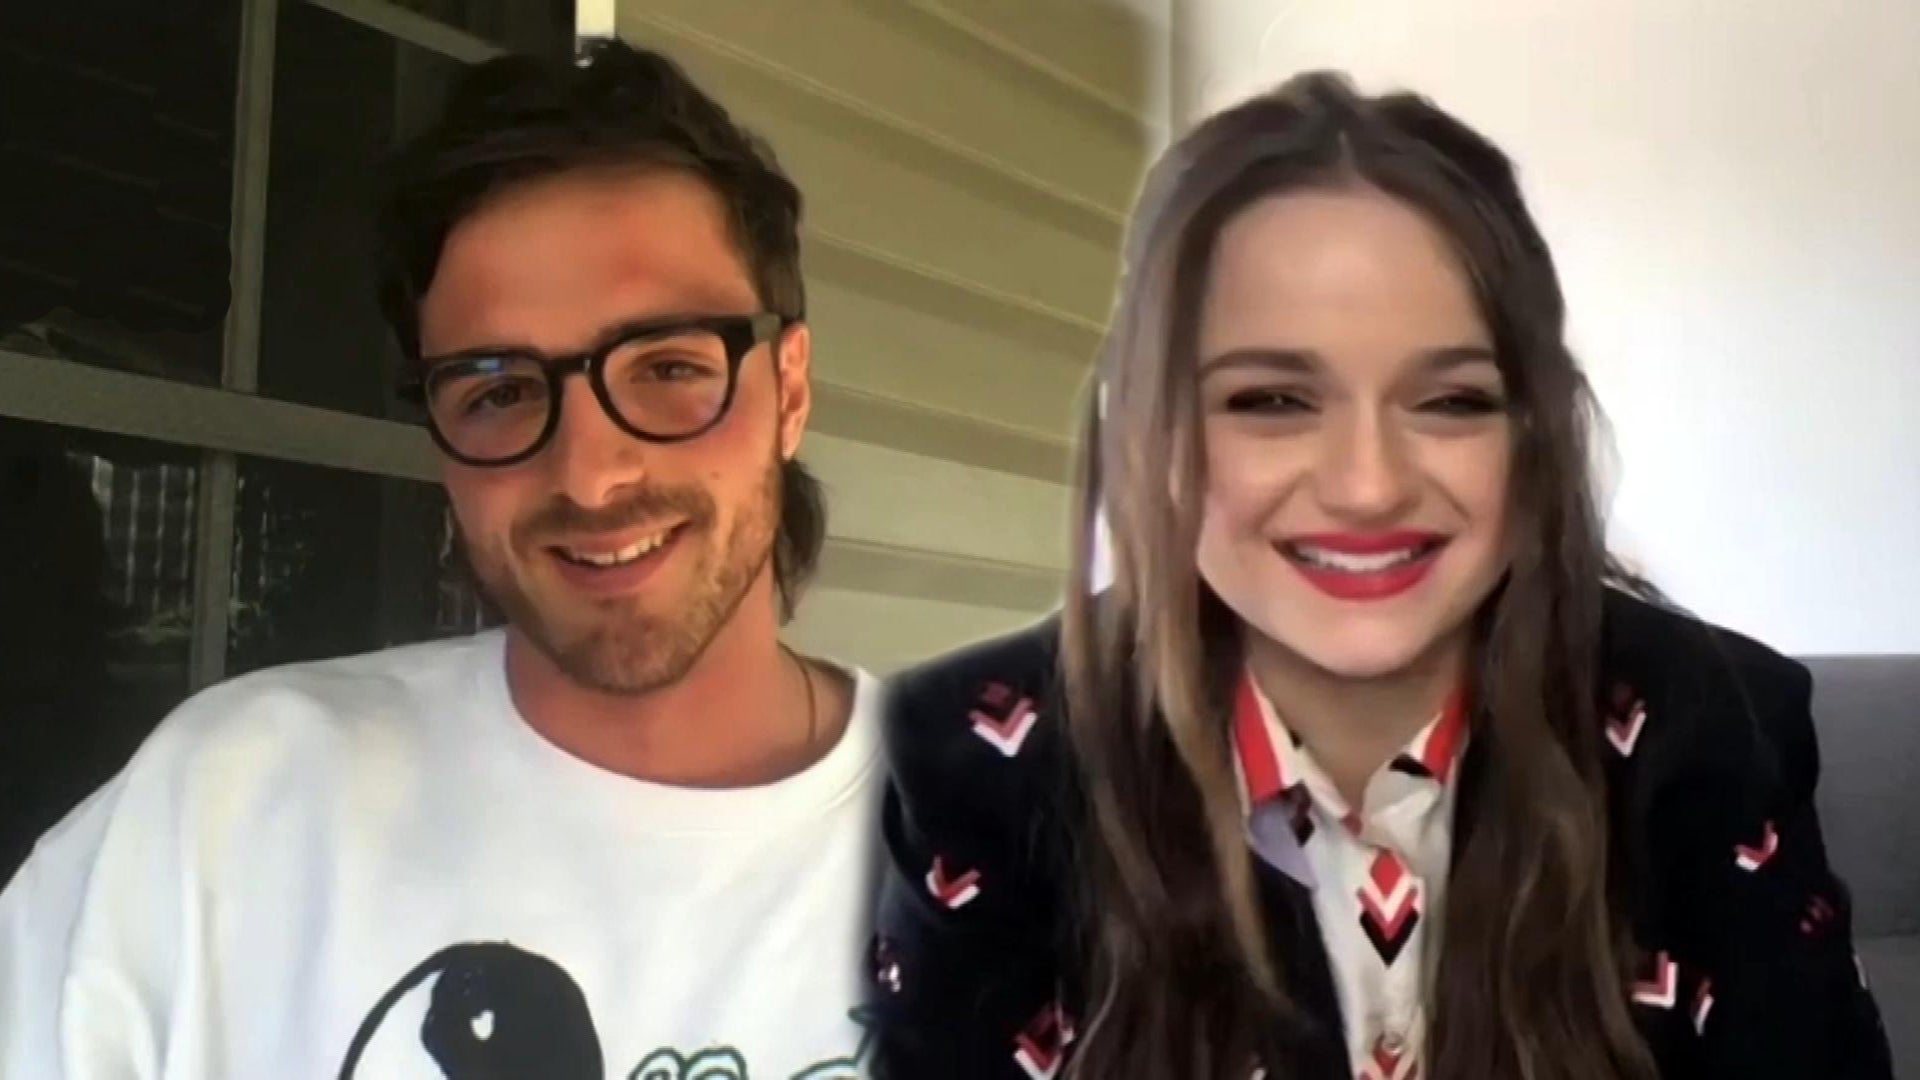 the Kissing Booth 2' Star Joey King on Working With Ex Jacob Elordi